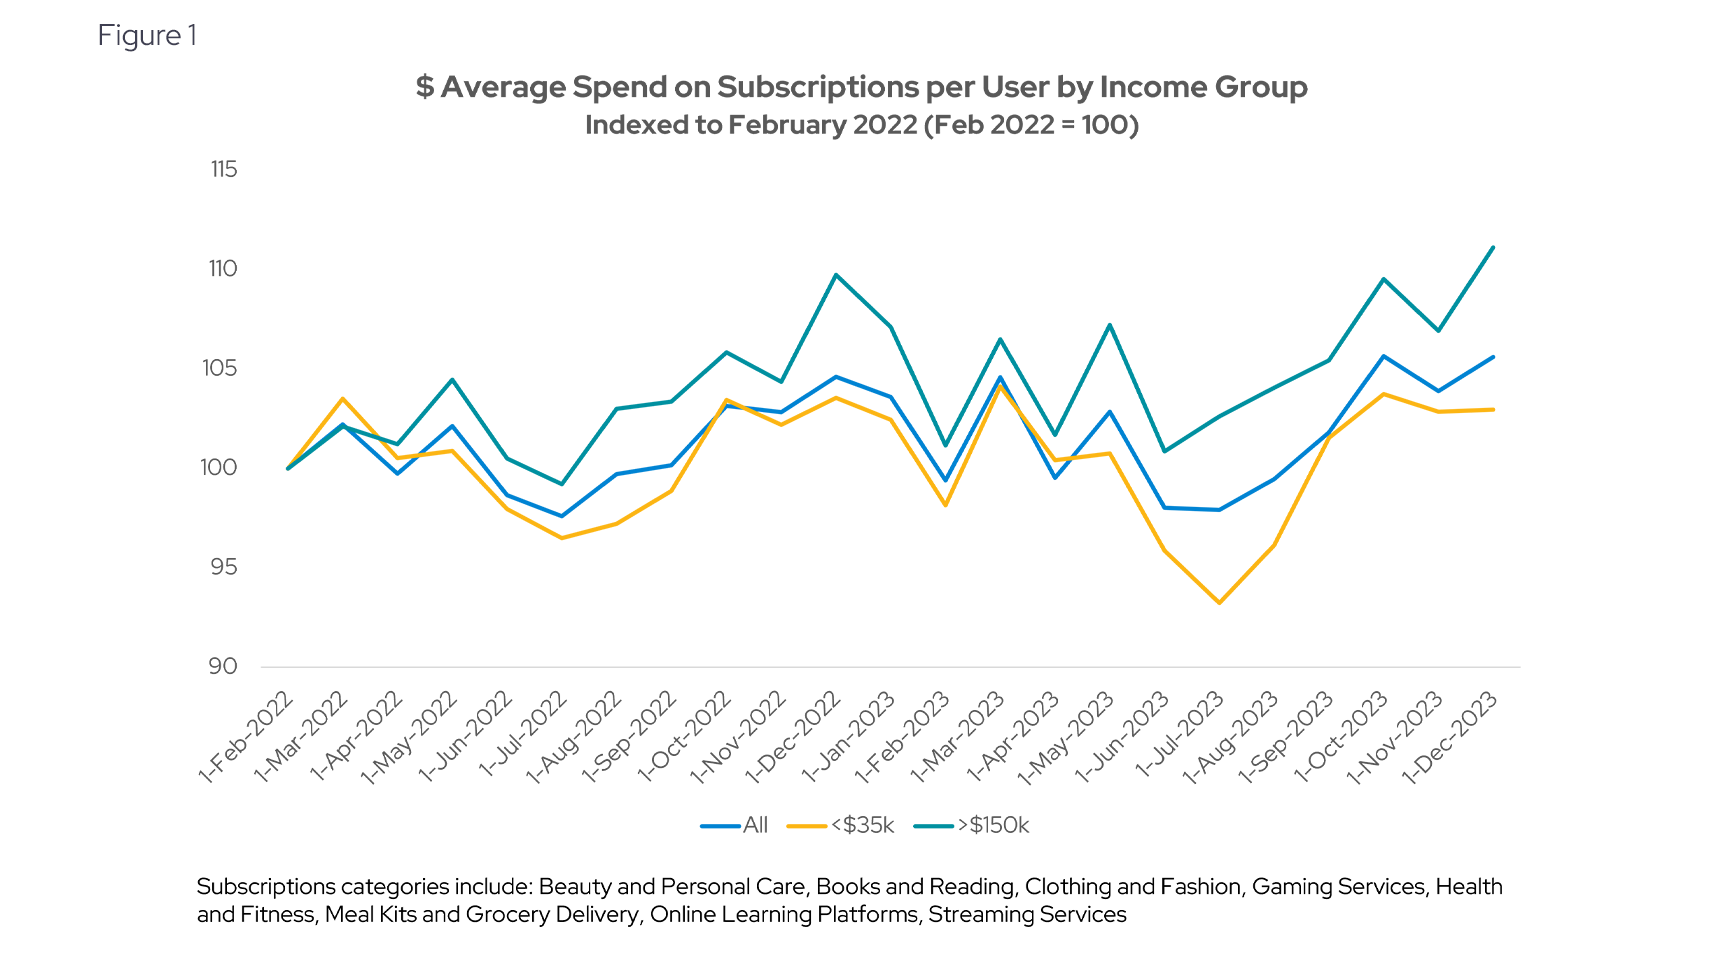 Increased spending on subscriptions